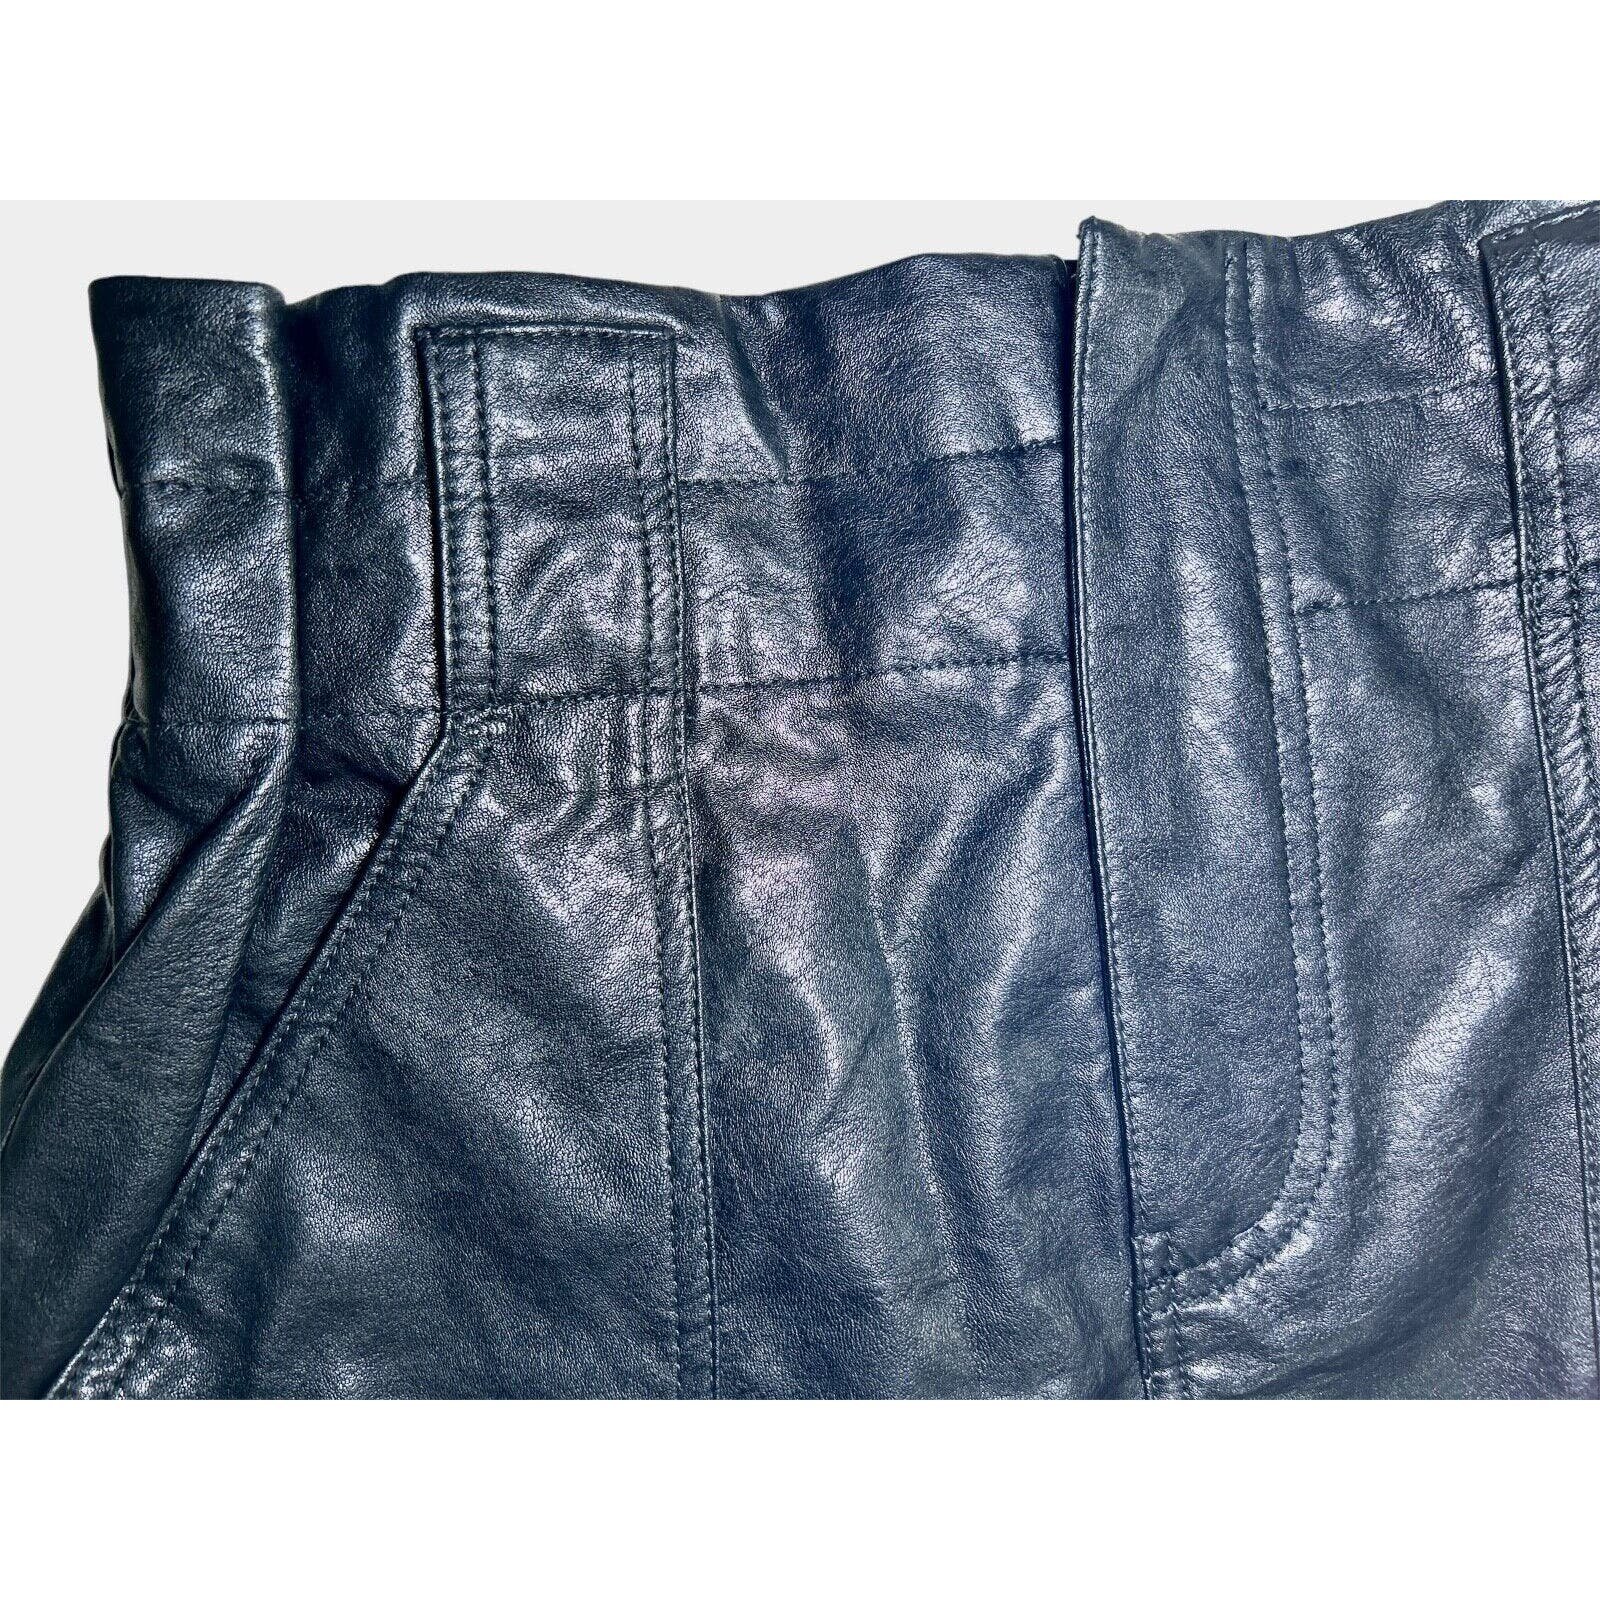 Discounted Black Mini Skirt Faux Leather Size Small by Signature 8 Elastic Waste PQGsPxoXo Cheap